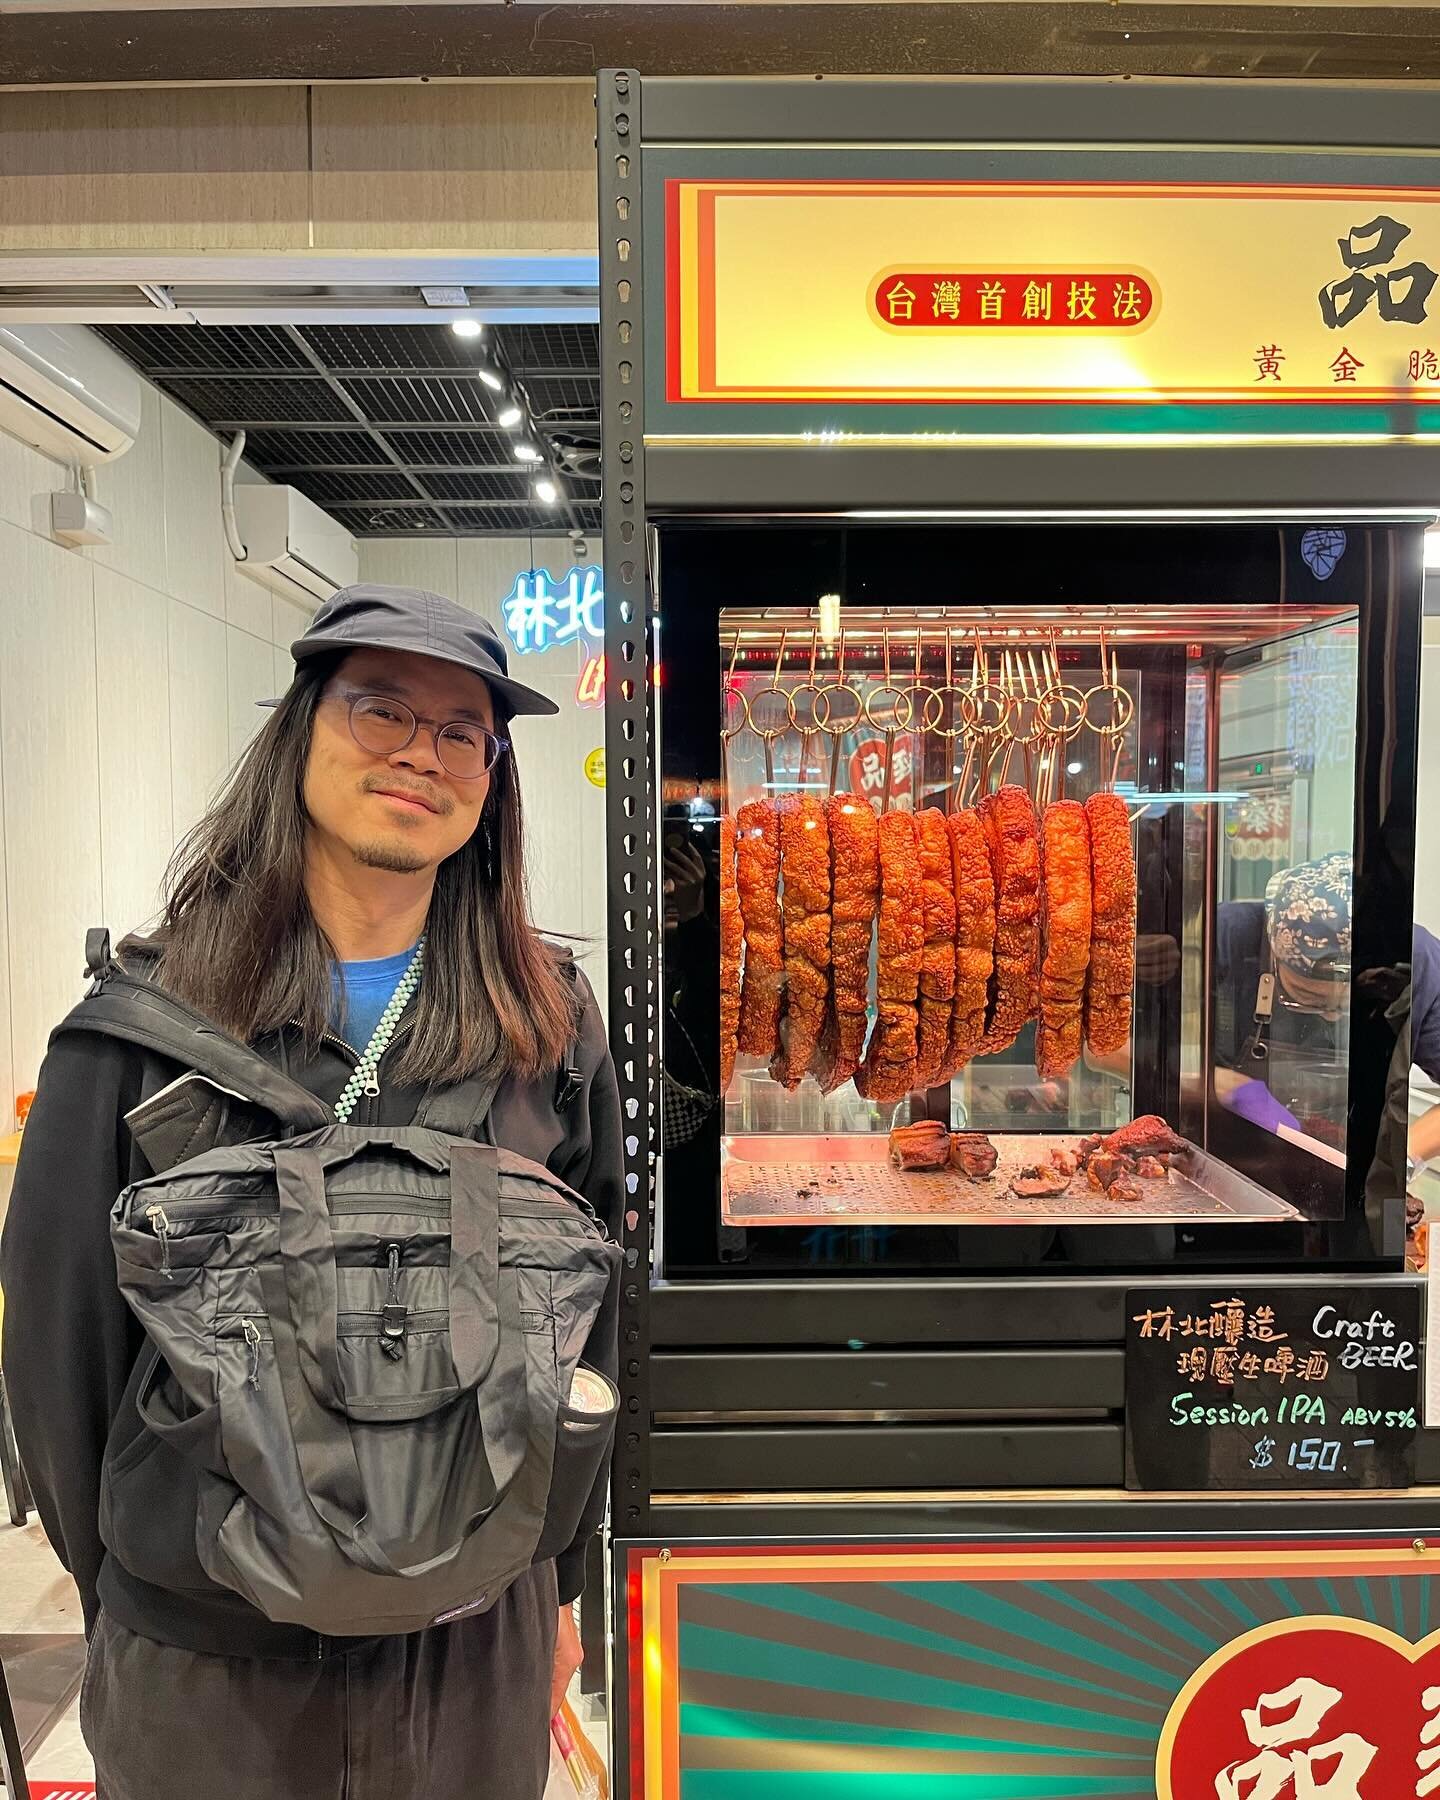 Back from Taiwan with 7 new pounds of me! Thanks to everyone who came out to 3 sold outs shows! Lots of shows coming up on the West Coast + Hawaii, and more TBA. Get tix now and pls share with locals! Join email list for notifications/presale codes. 